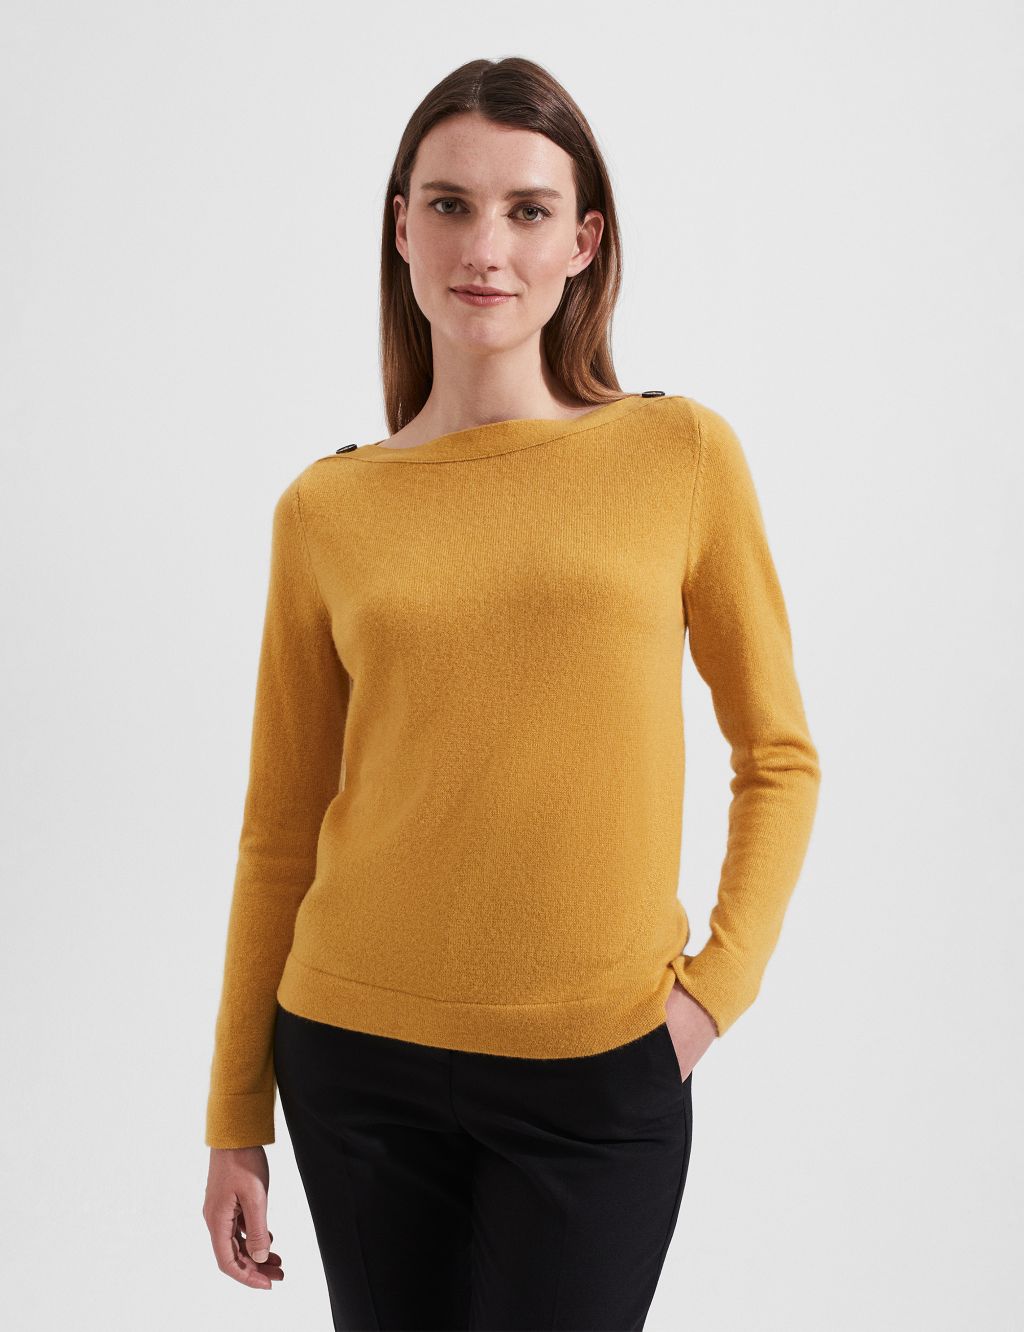 Merino Rich Wool Jumper with Cashmere image 1